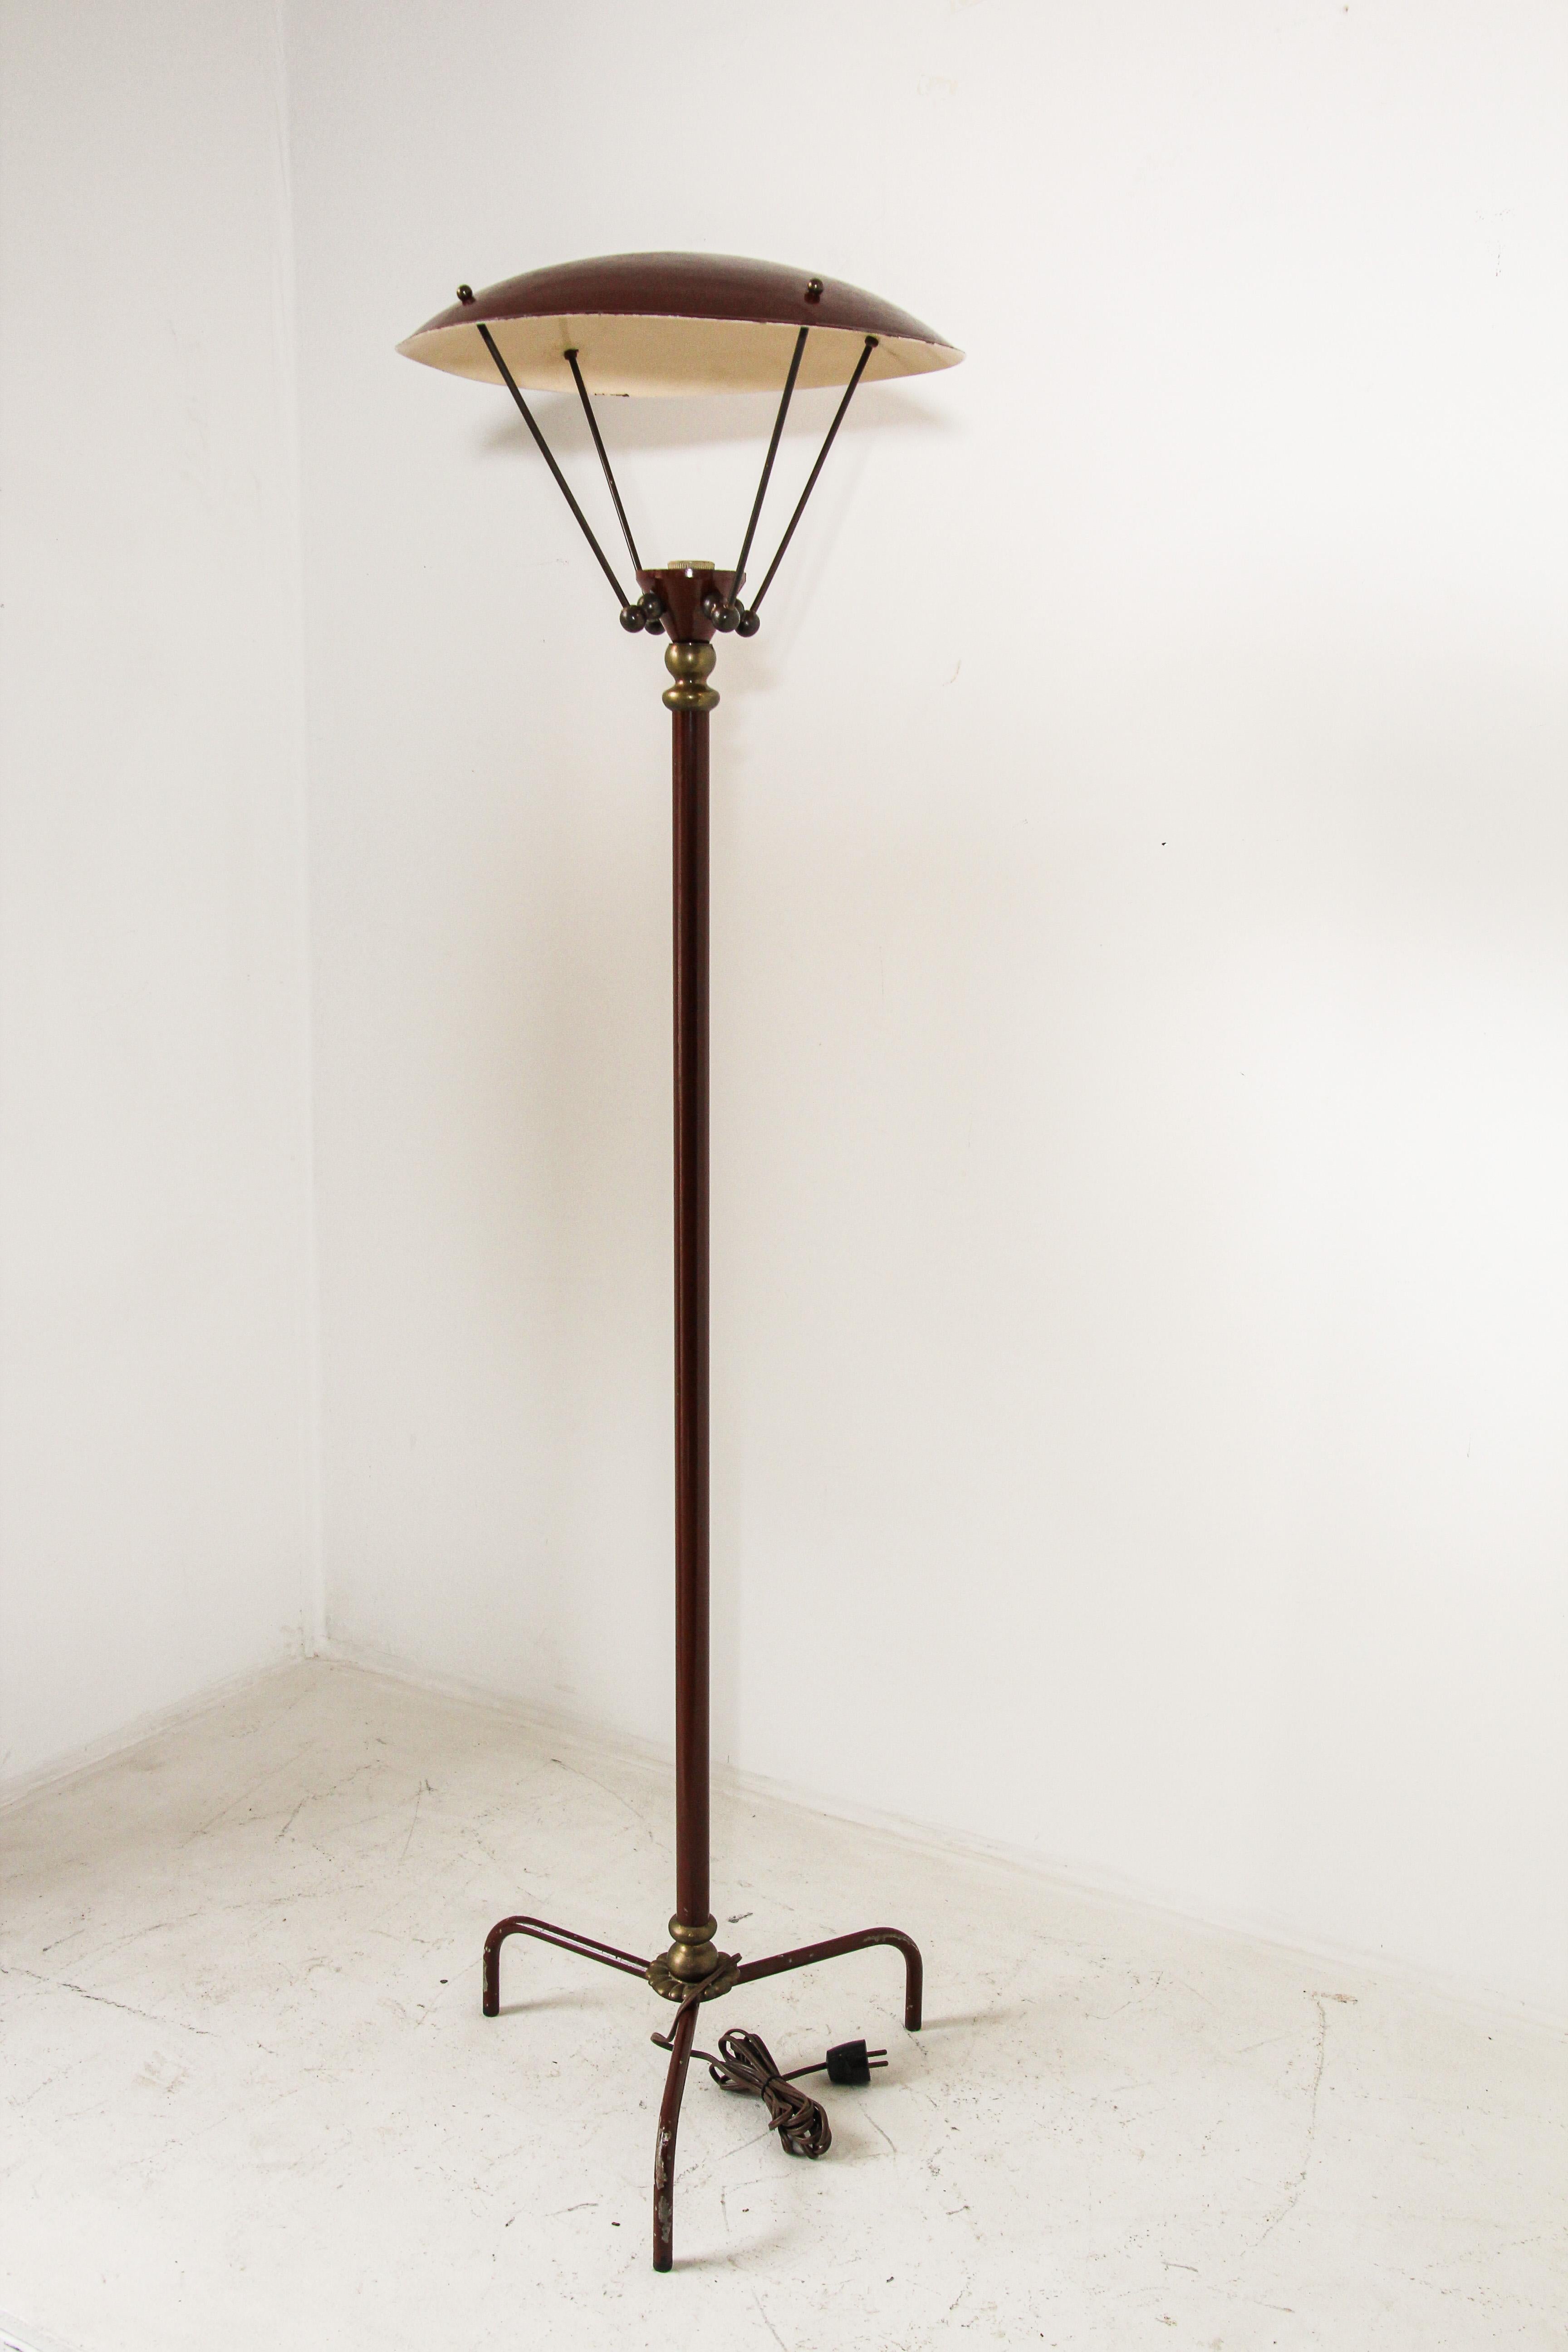 A Sculptural vintage French tripod floor lamp with brass details and iron frame.
Substantial midcentury vintage brown enamel and brass floor lamp from the 1950s.
Architectural, sculptural, statement lighting featuring a tubular brown central column,